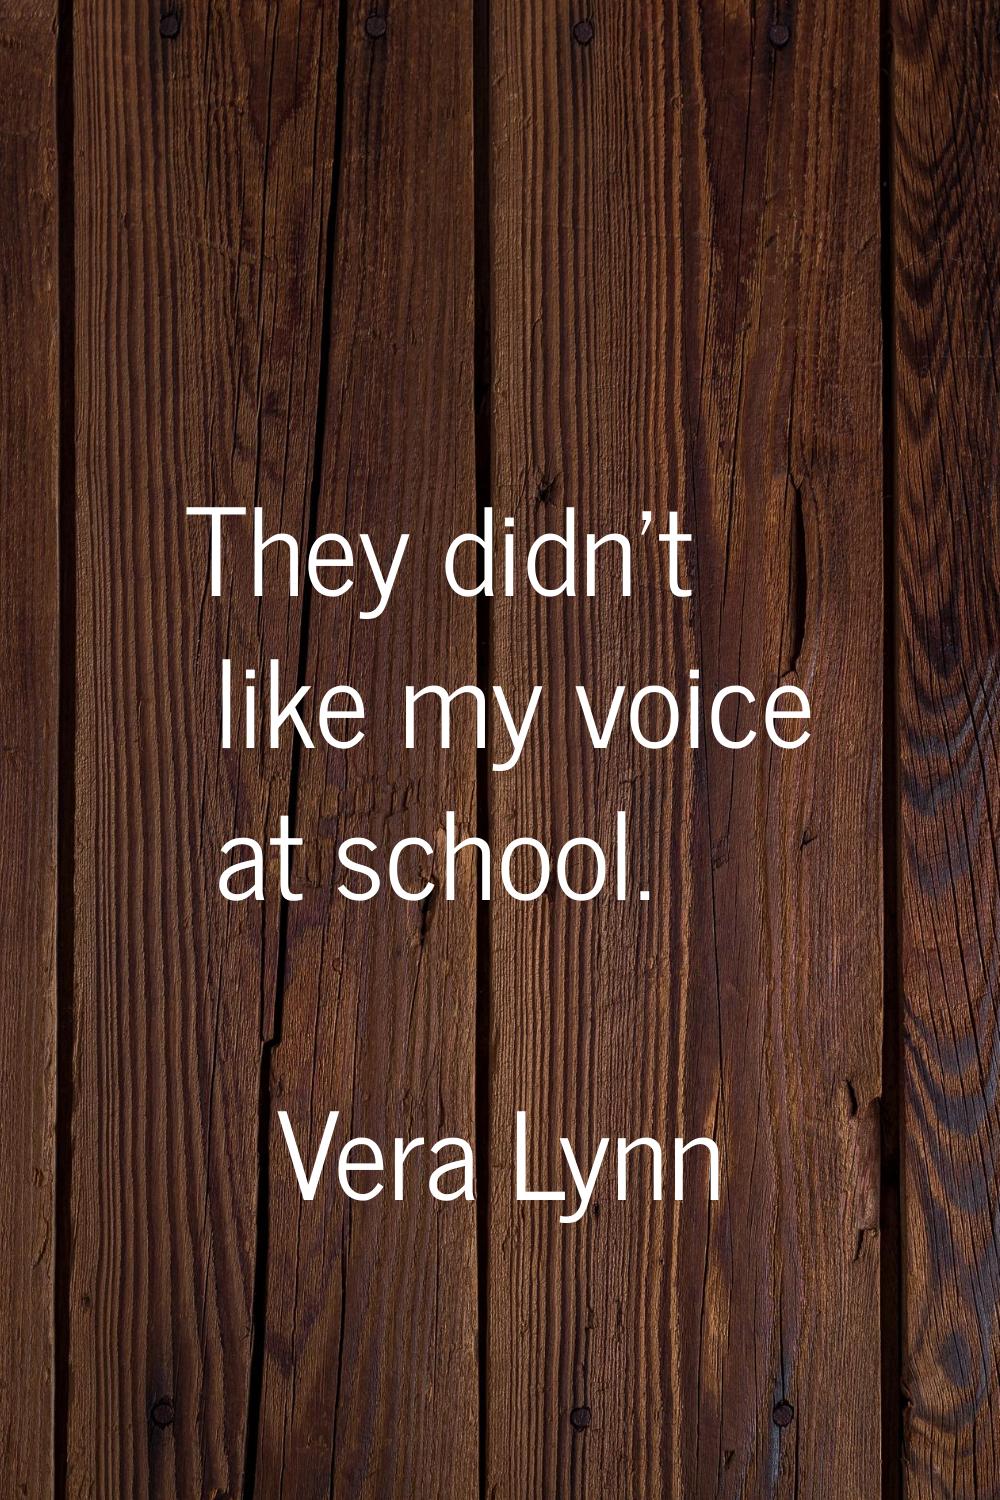 They didn't like my voice at school.